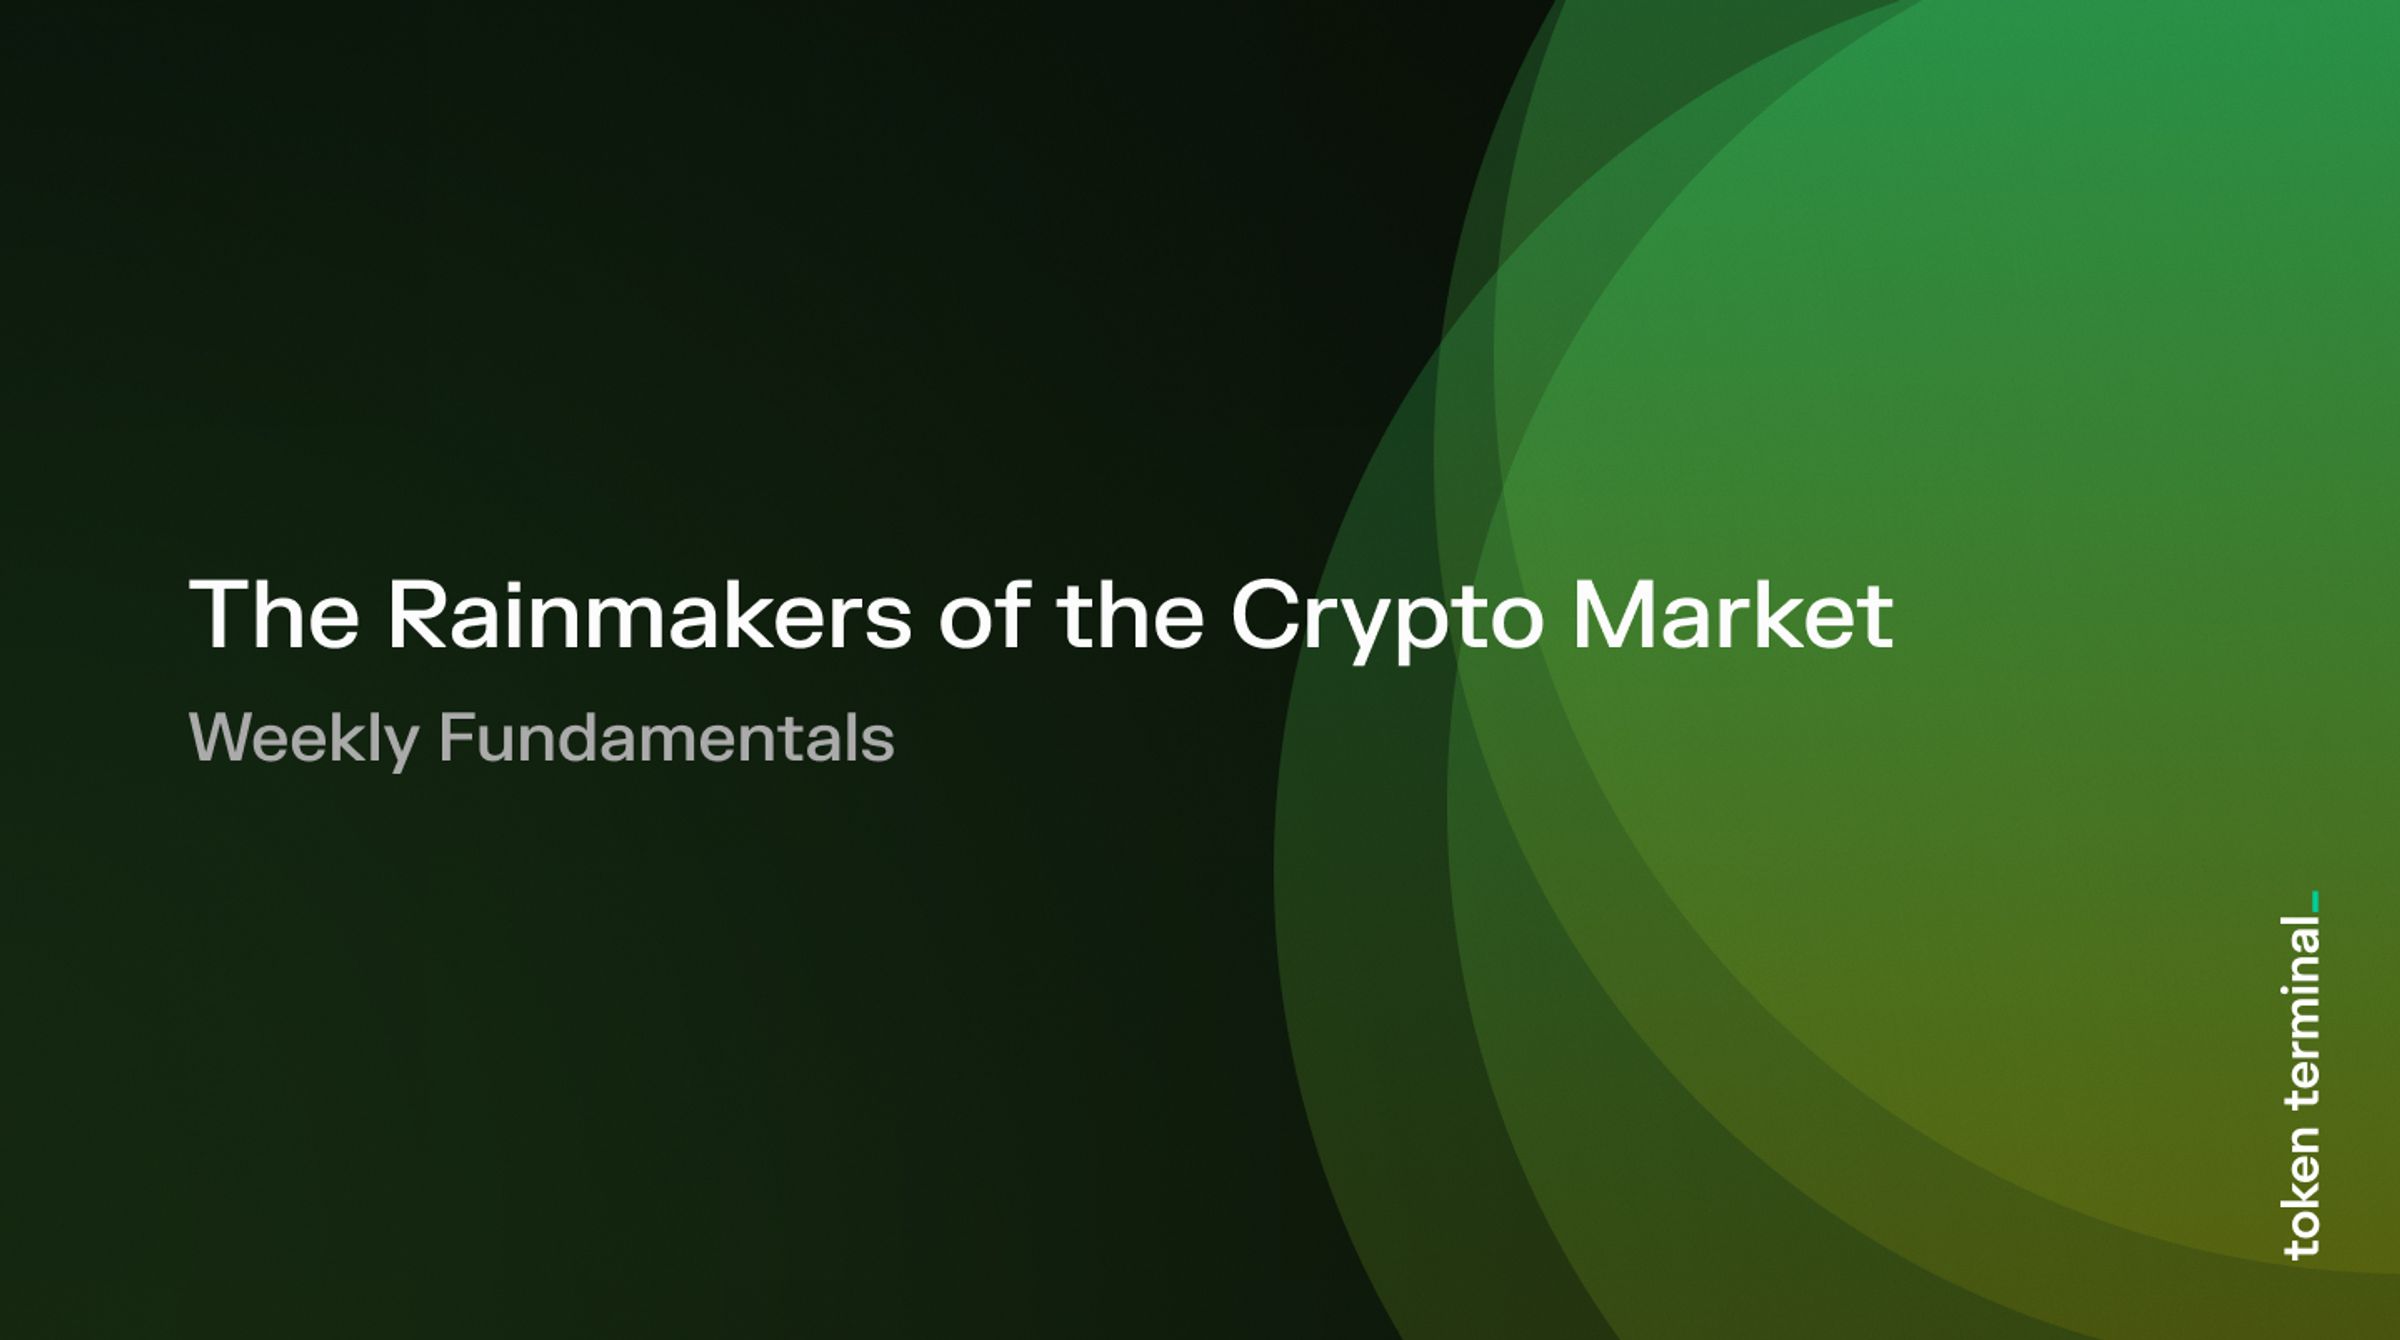 The Rainmakers of the Crypto Market